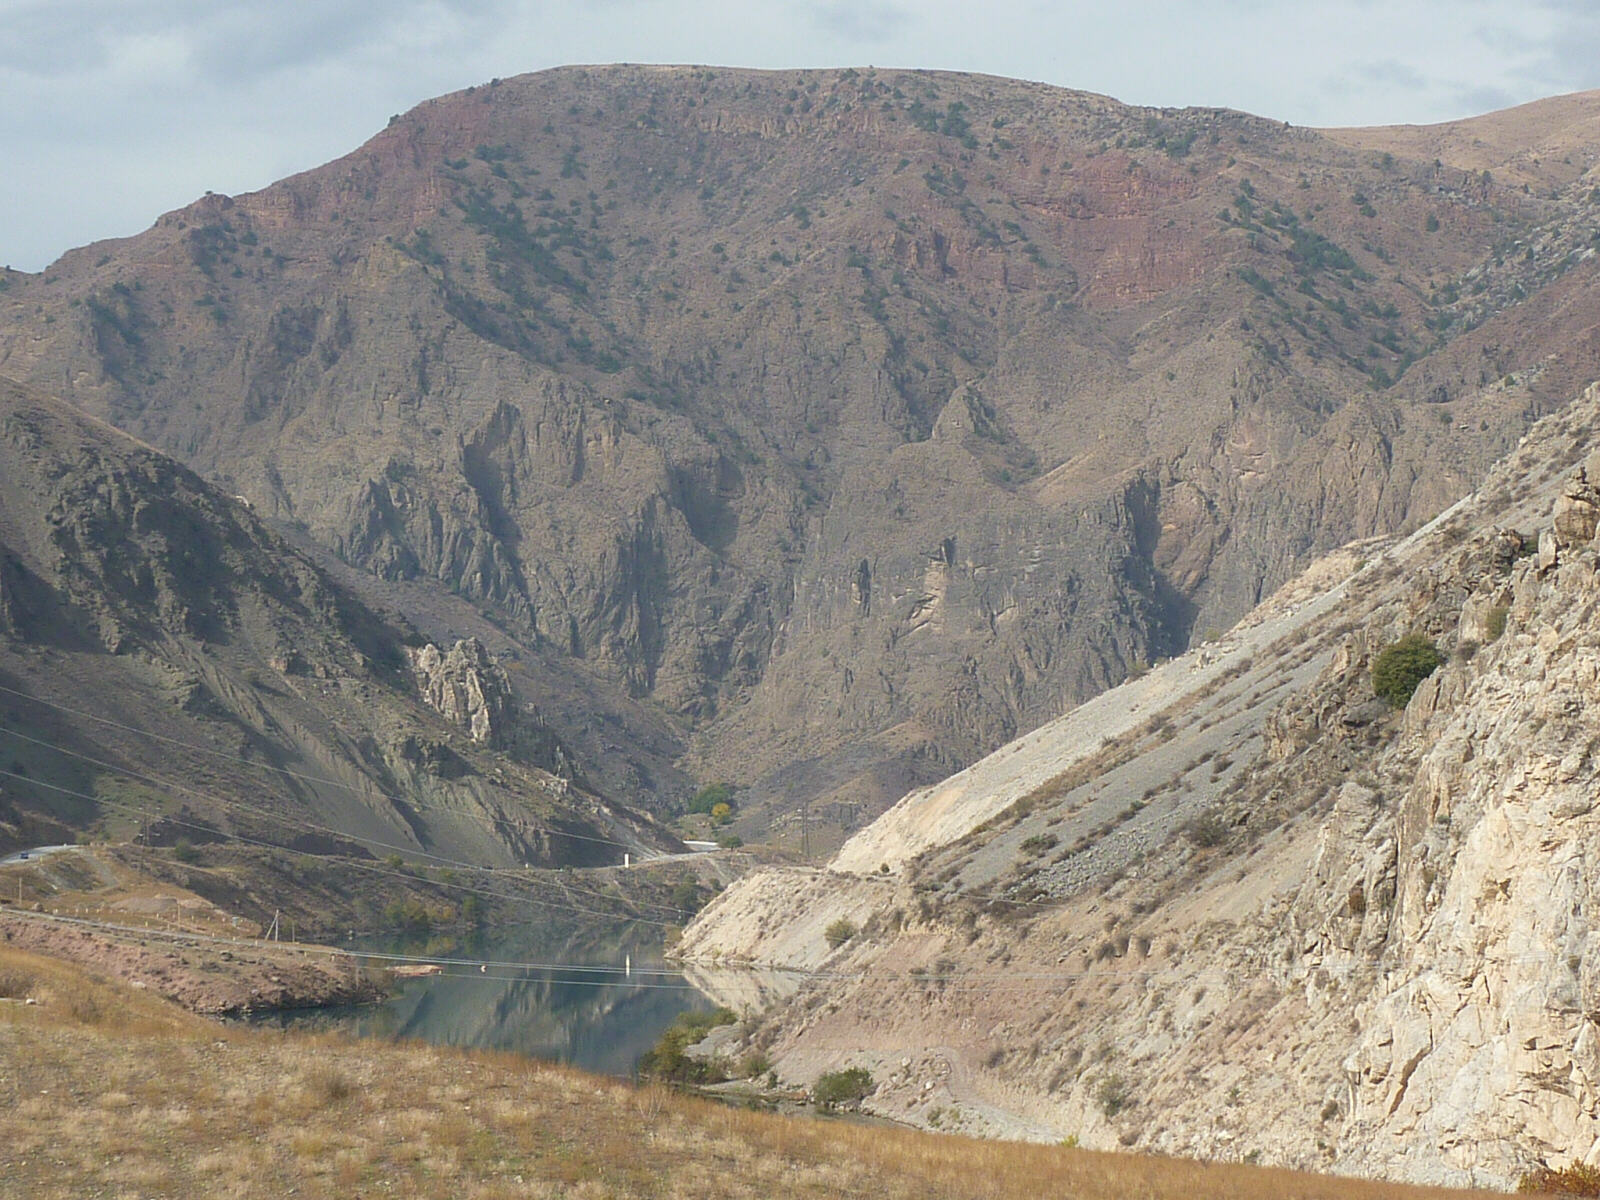 On the road across the mountains to Bishkek, Kyrgyzstan